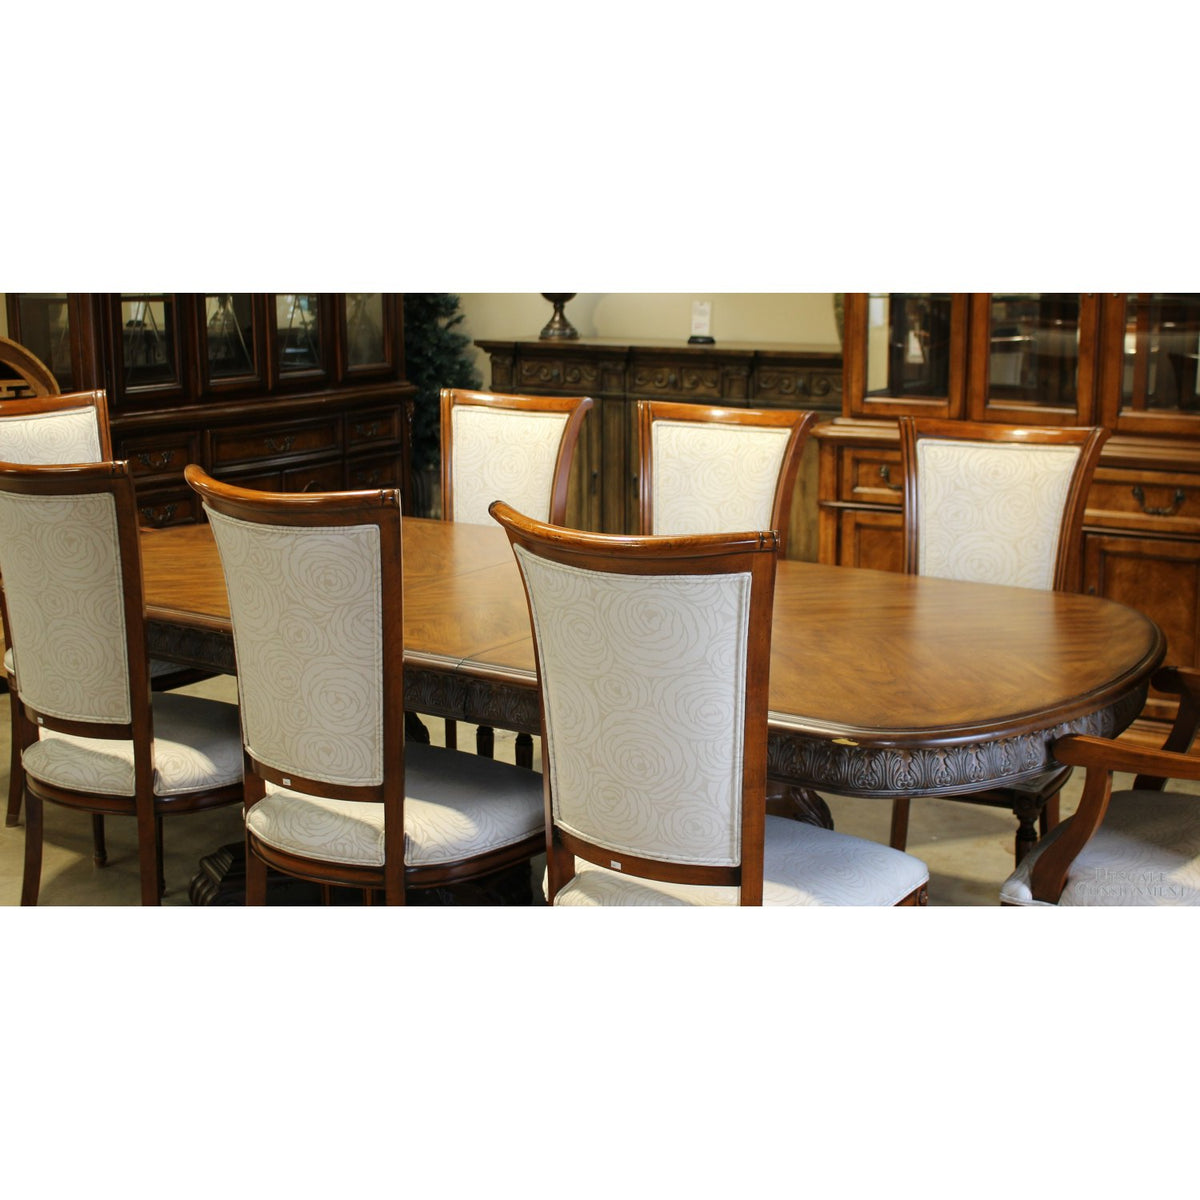 Double Pedestal Dining Table w/8 Chairs